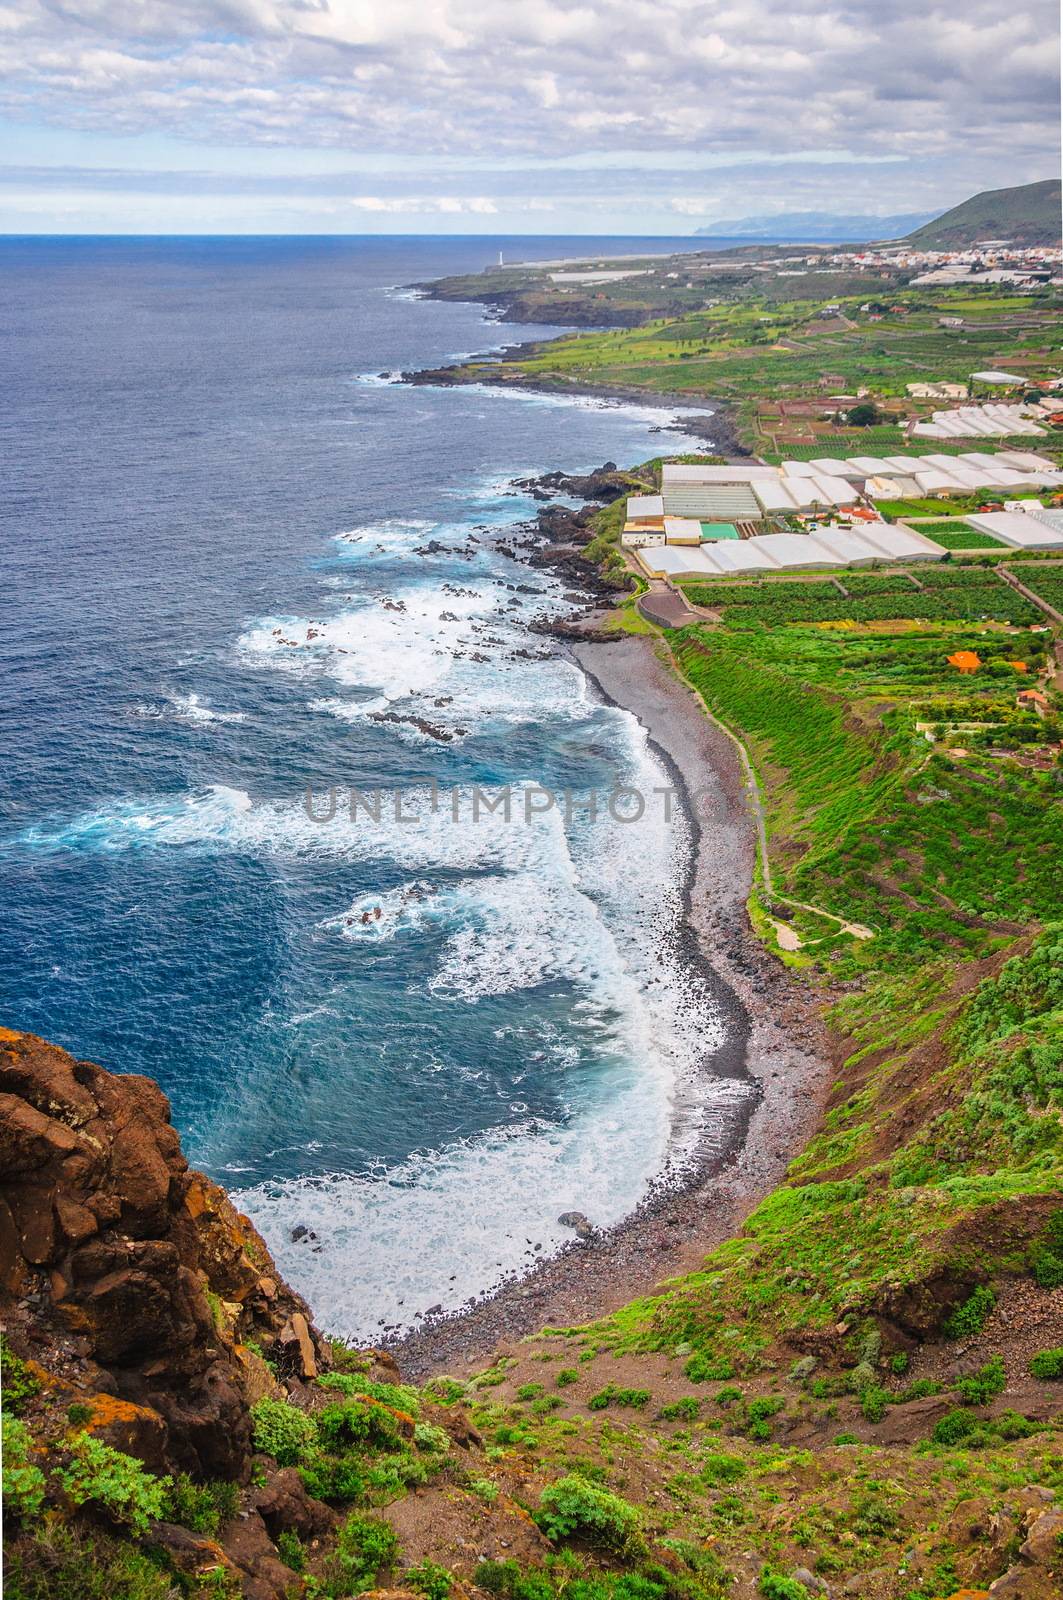 Ocean shore with waves in Tenerife, Canary Islands by Eagle2308